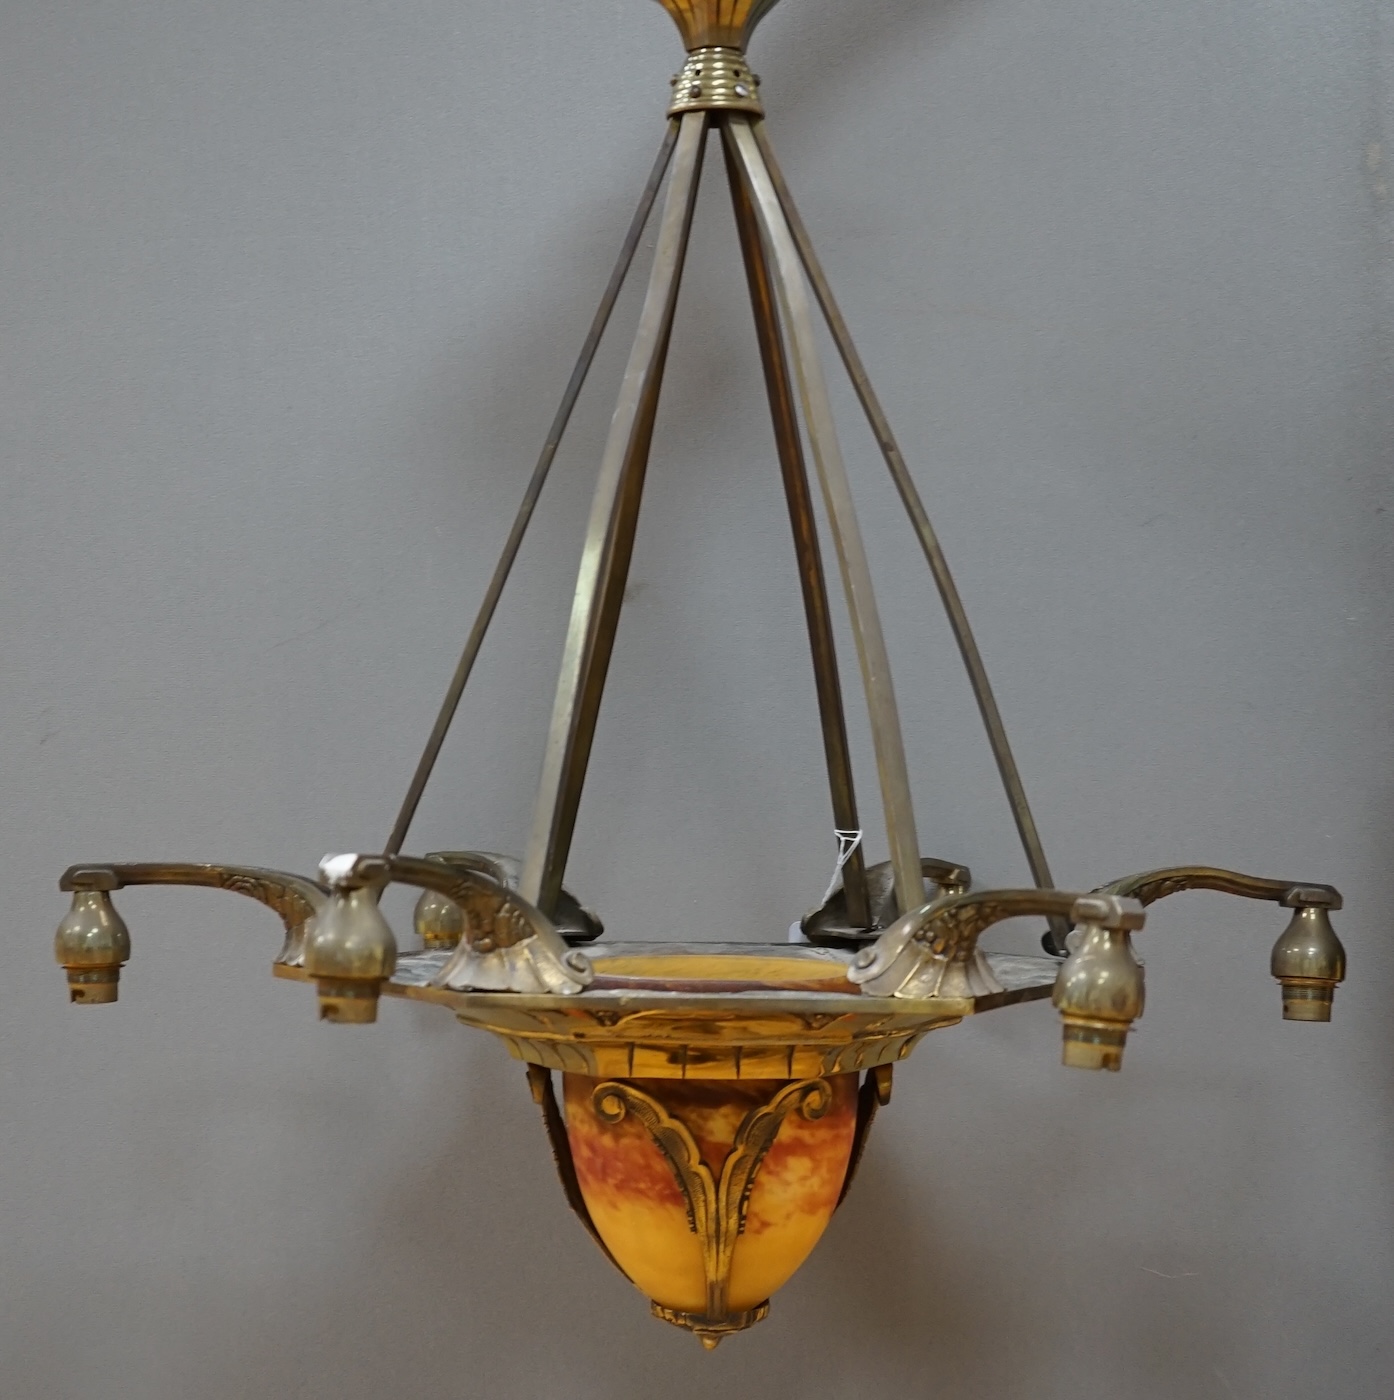 A French Art Deco hanging brass electrolier with Verre Deross mottled glass shade. Condition - good, untested